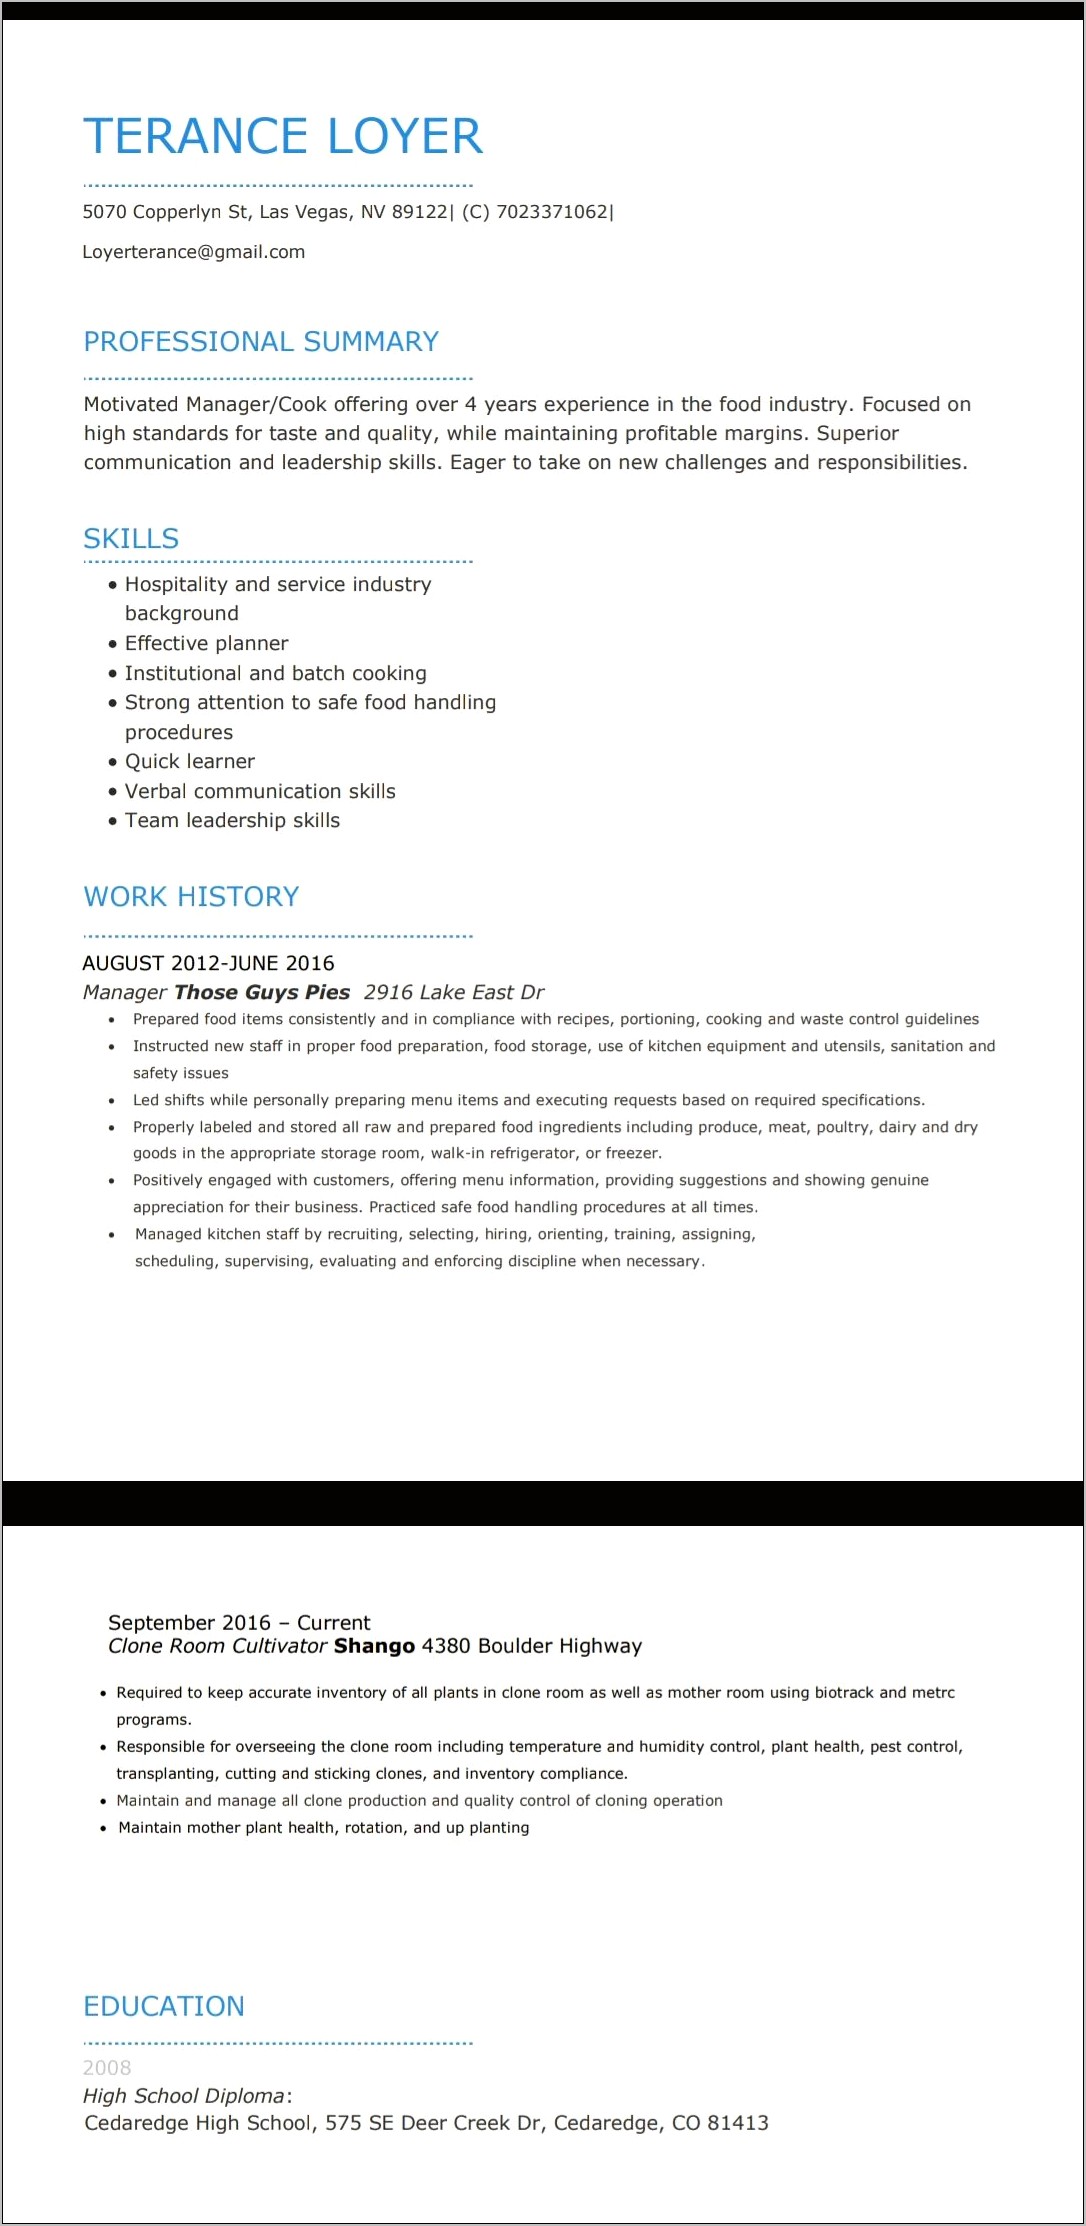 Example Cover Letter For Resume Cannabis